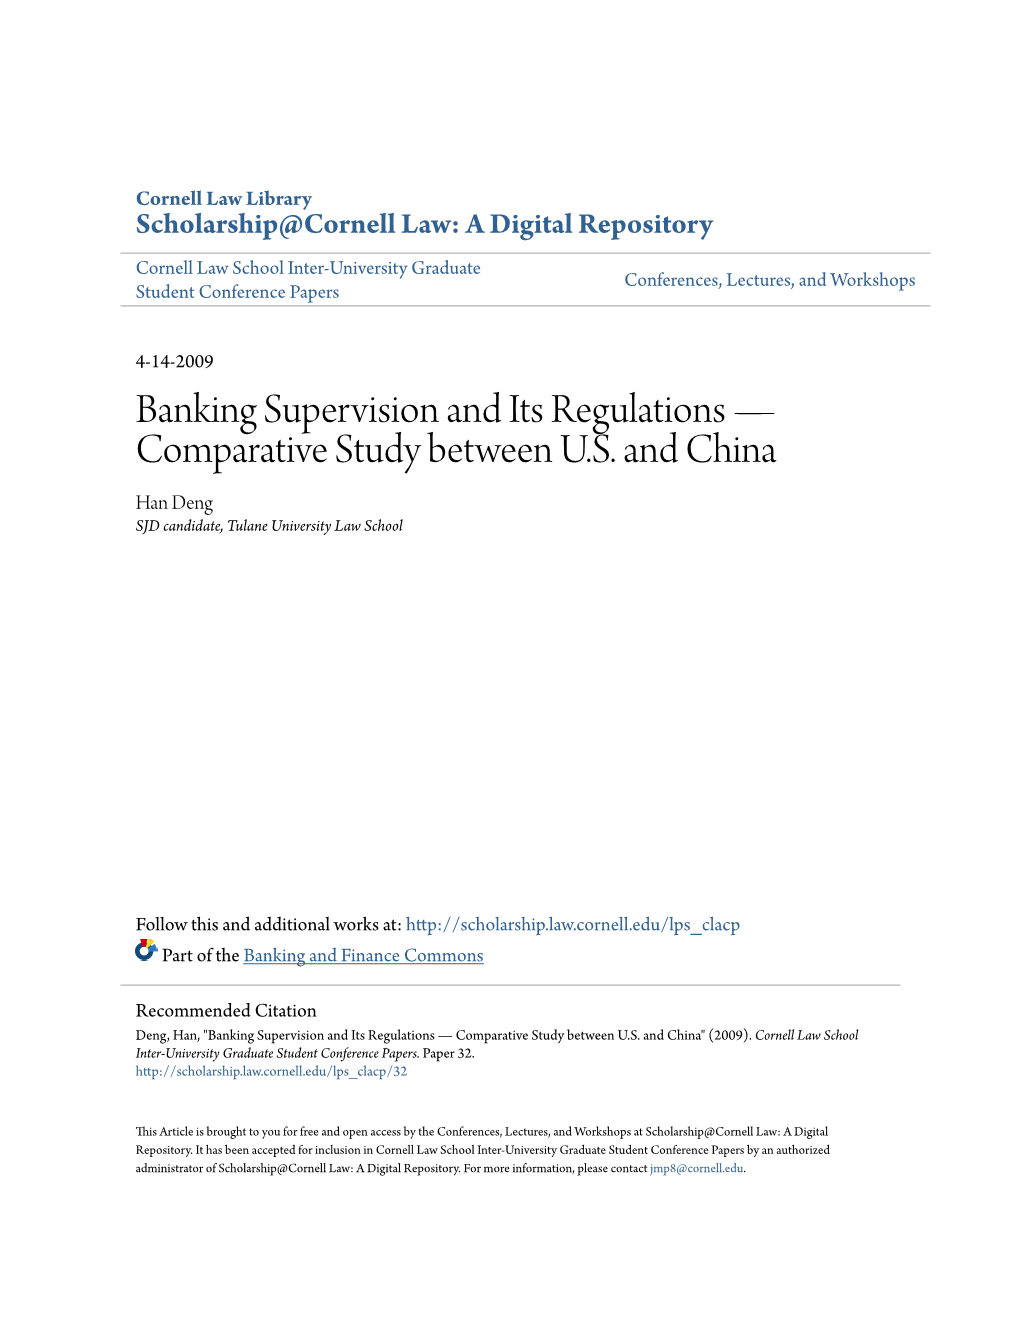 Banking Supervision and Its Regulations — Comparative Study Between U.S